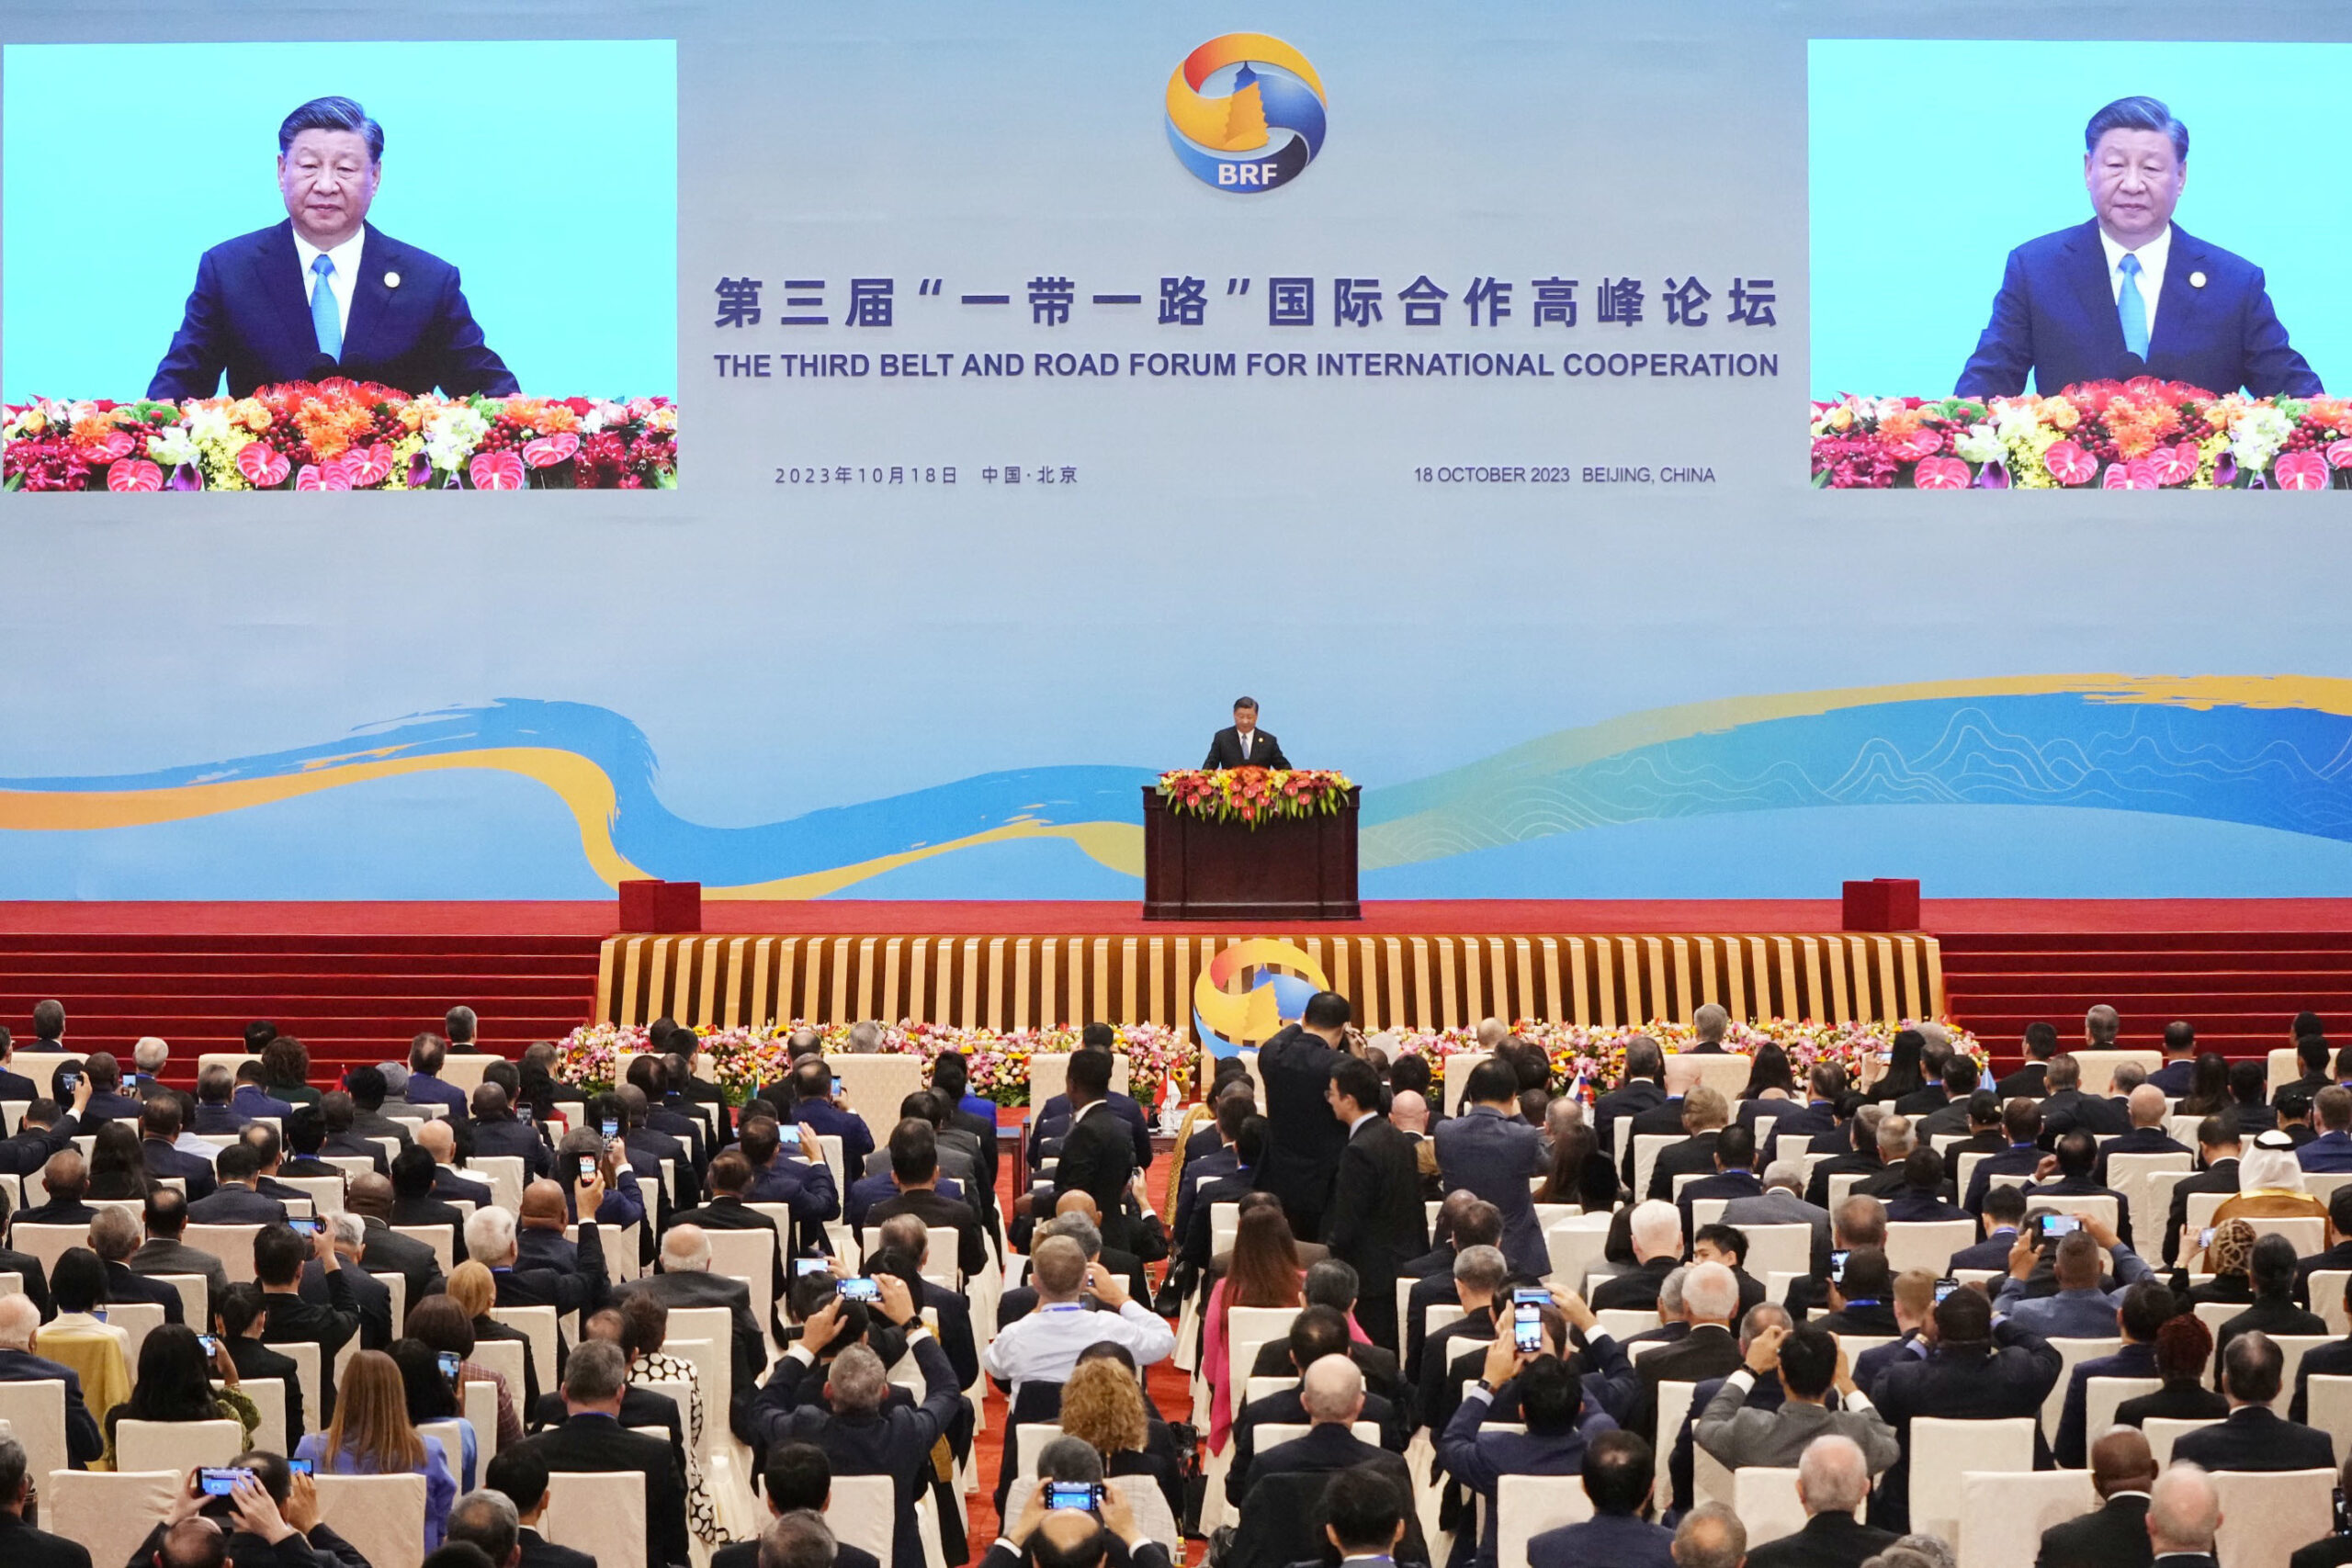 Chinese leader Xi Jinping gives a speech at the “One Belt, One Road” international conference held at the Great Hall of the People in Beijing in October 2023 (Photo:Kyodo)